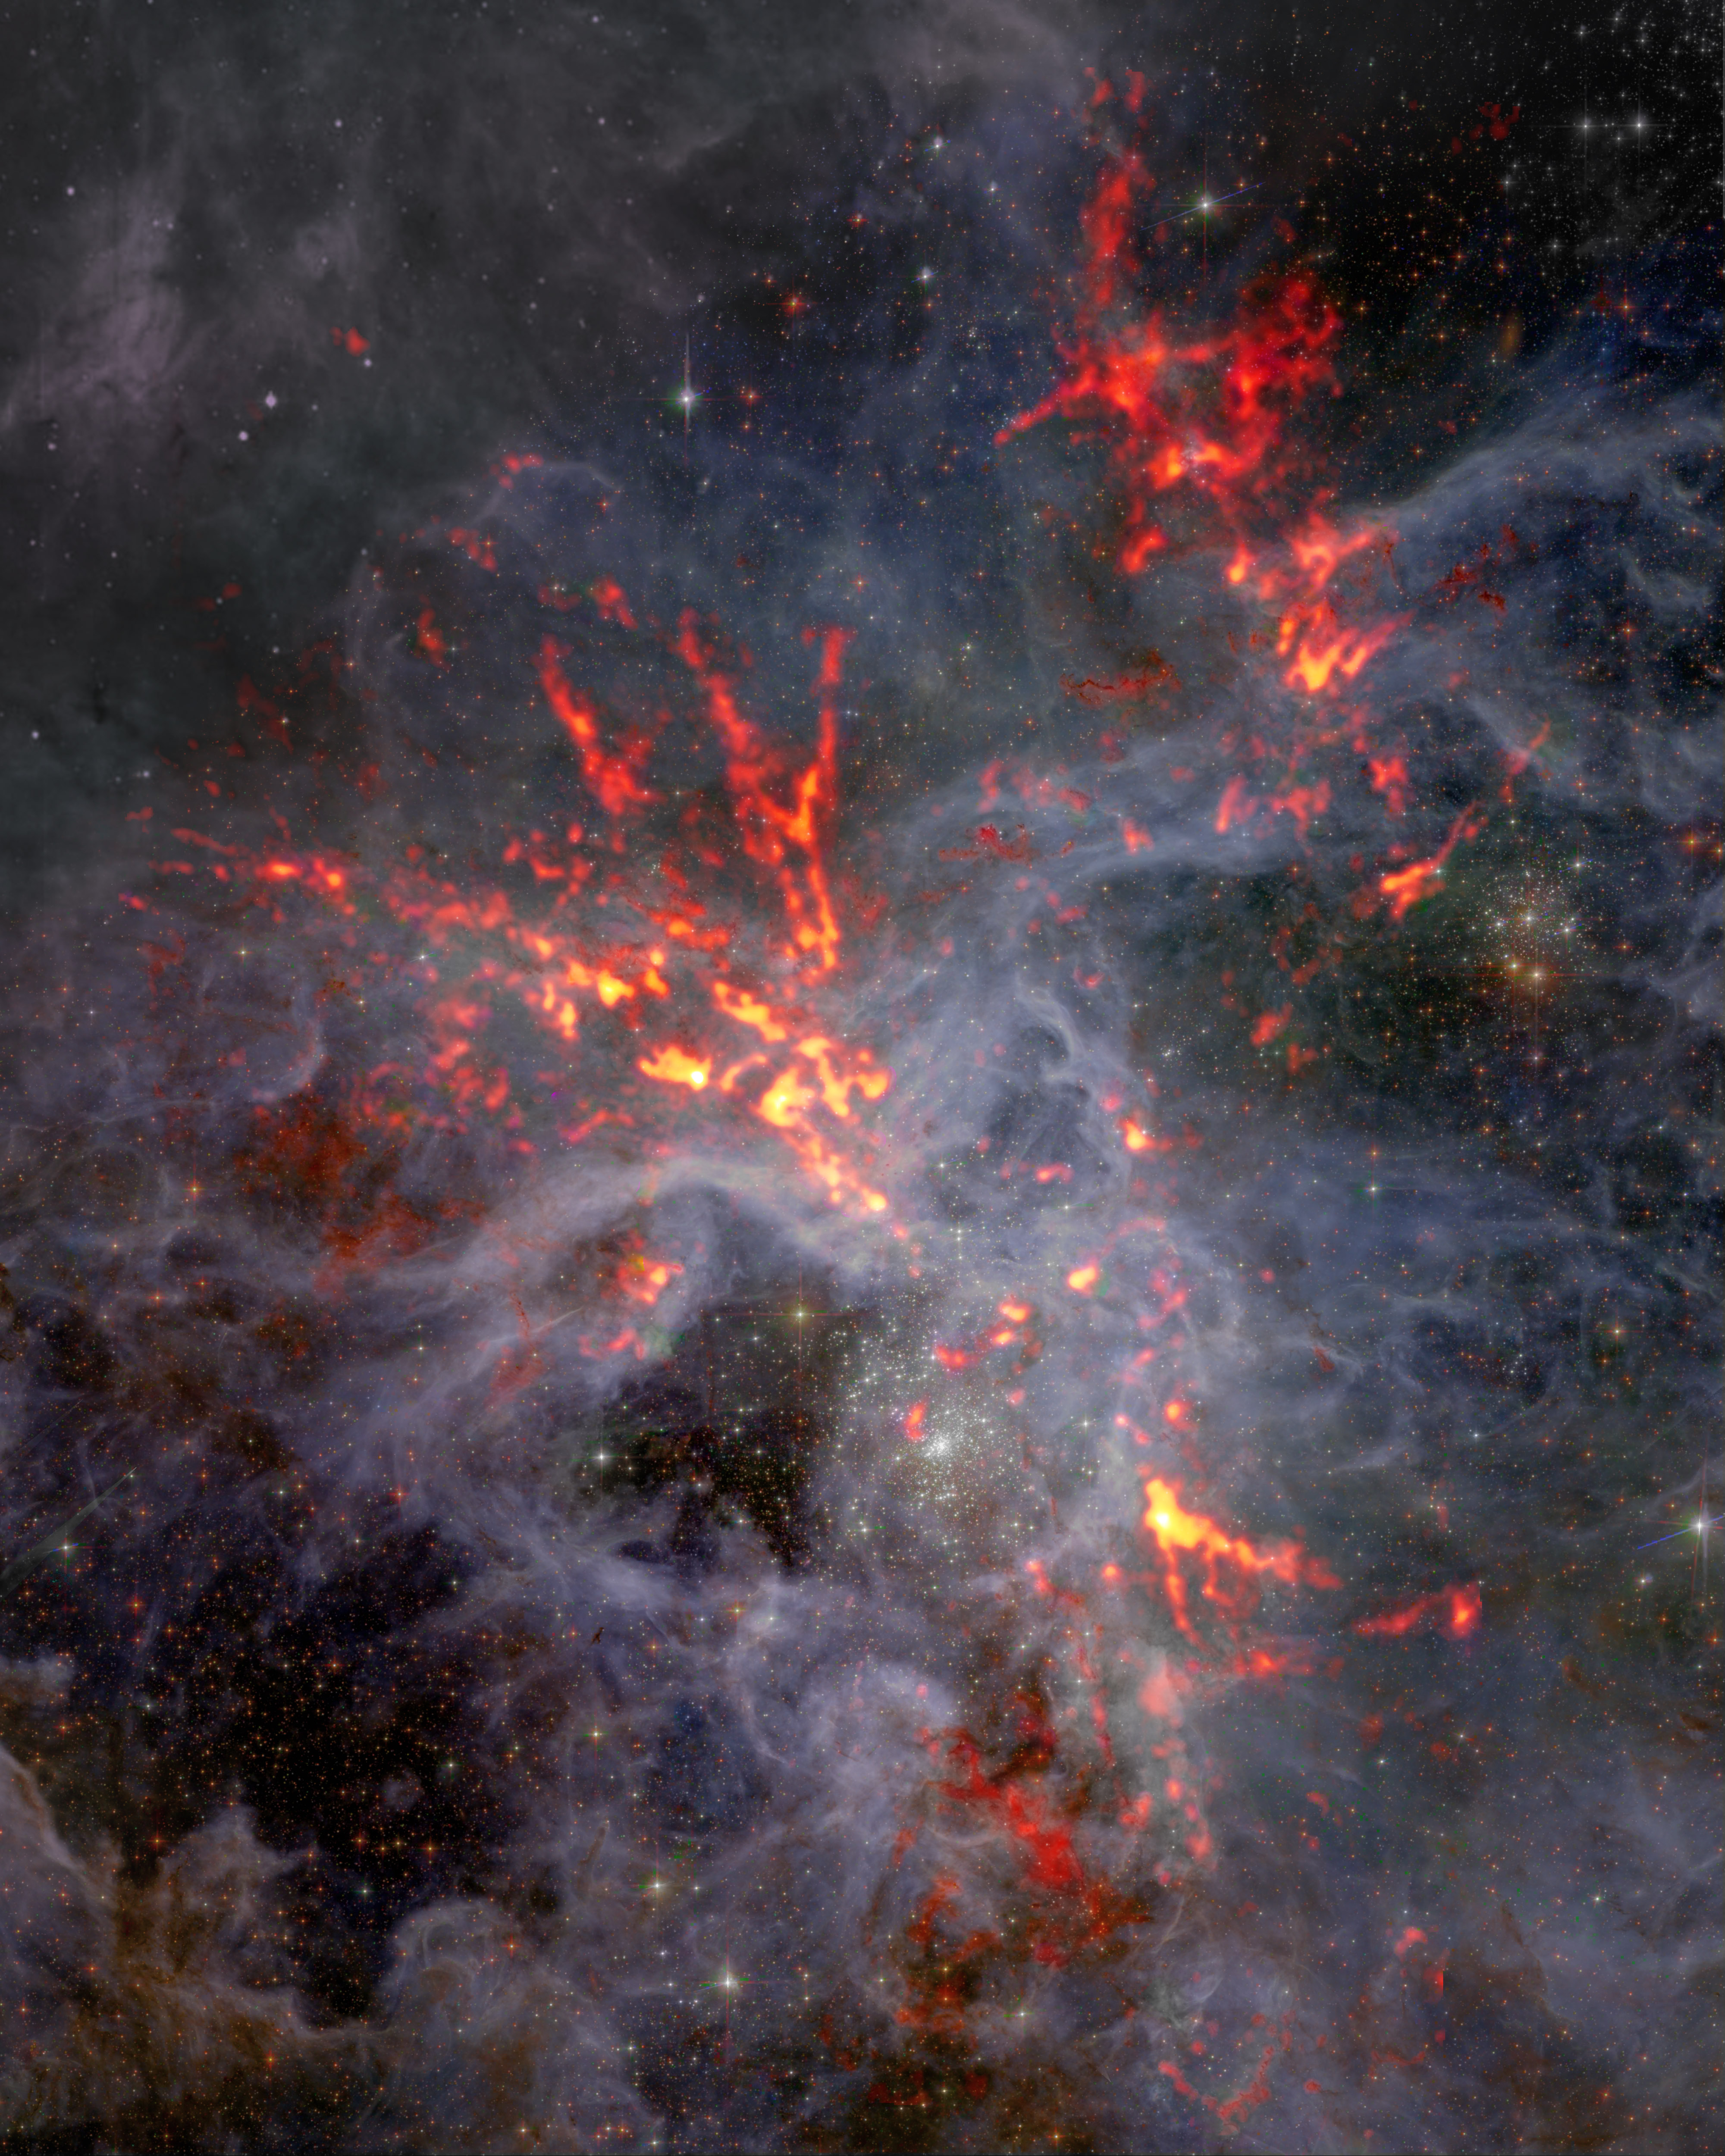 Nebula's Frozen Clouds at Heart of Violent Star Formation